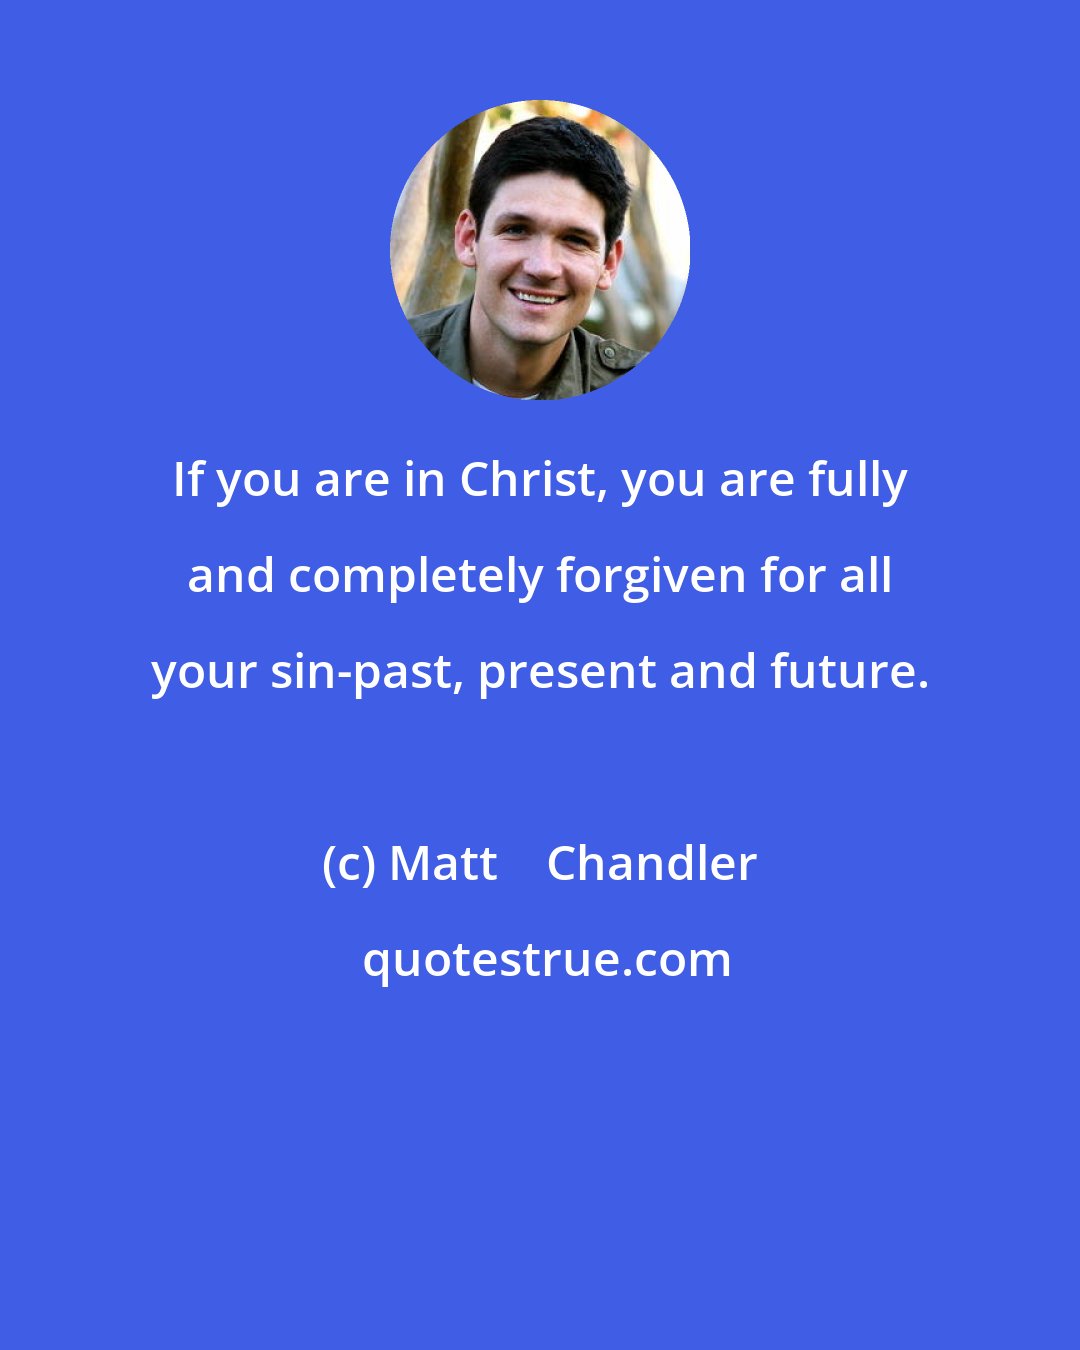 Matt    Chandler: If you are in Christ, you are fully and completely forgiven for all your sin-past, present and future.